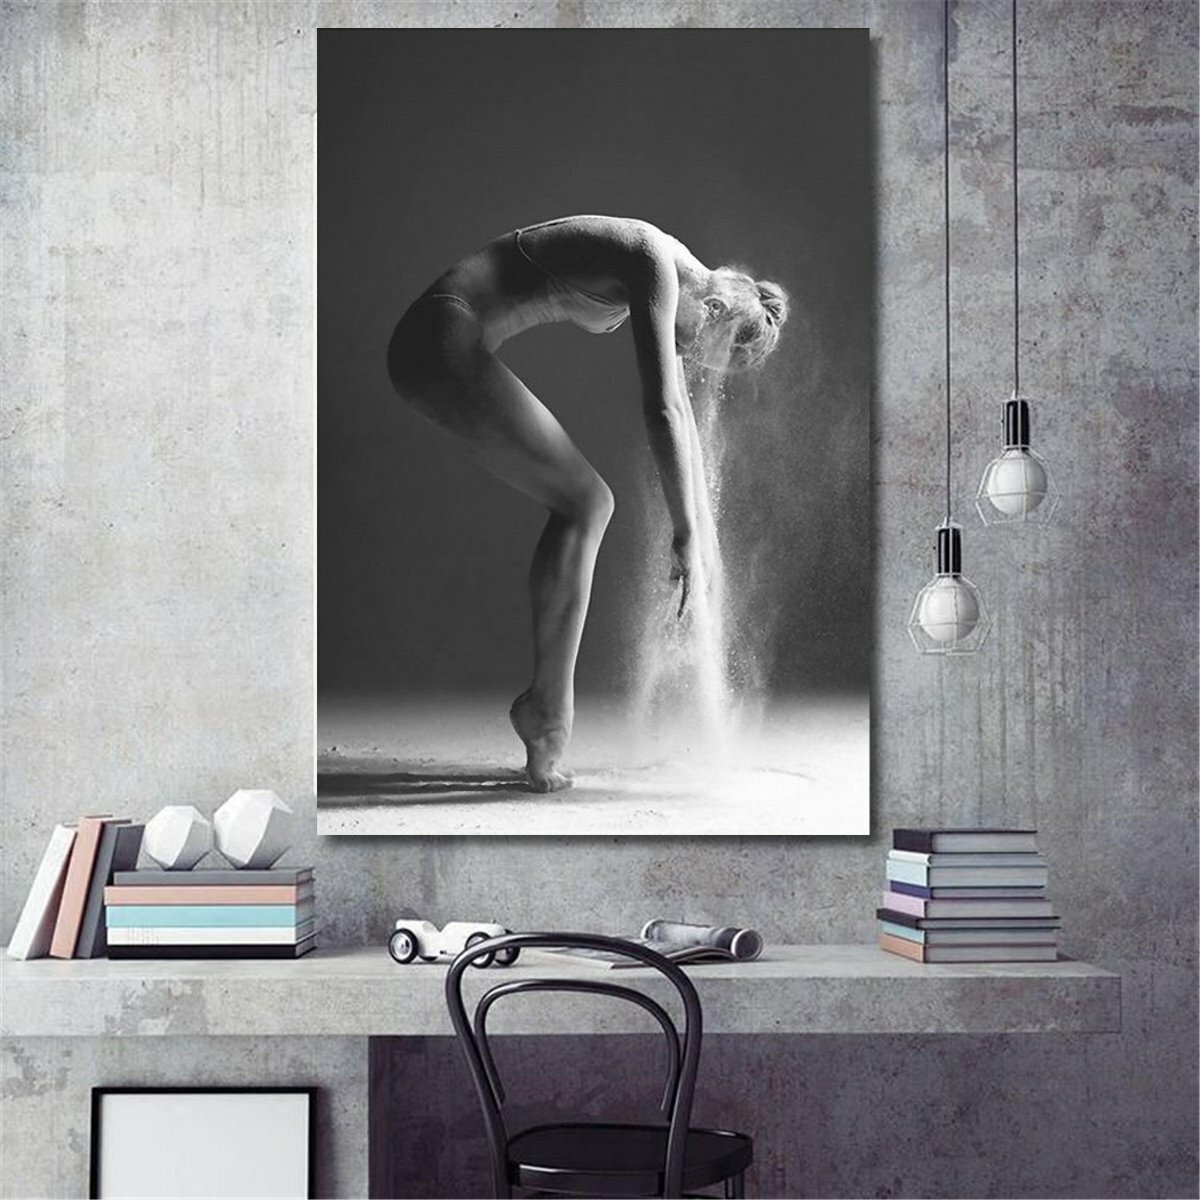 Nordic Dancing Girl Canvas Oil Printed Paintings Home Wall Poster Decor Unframed Decorations